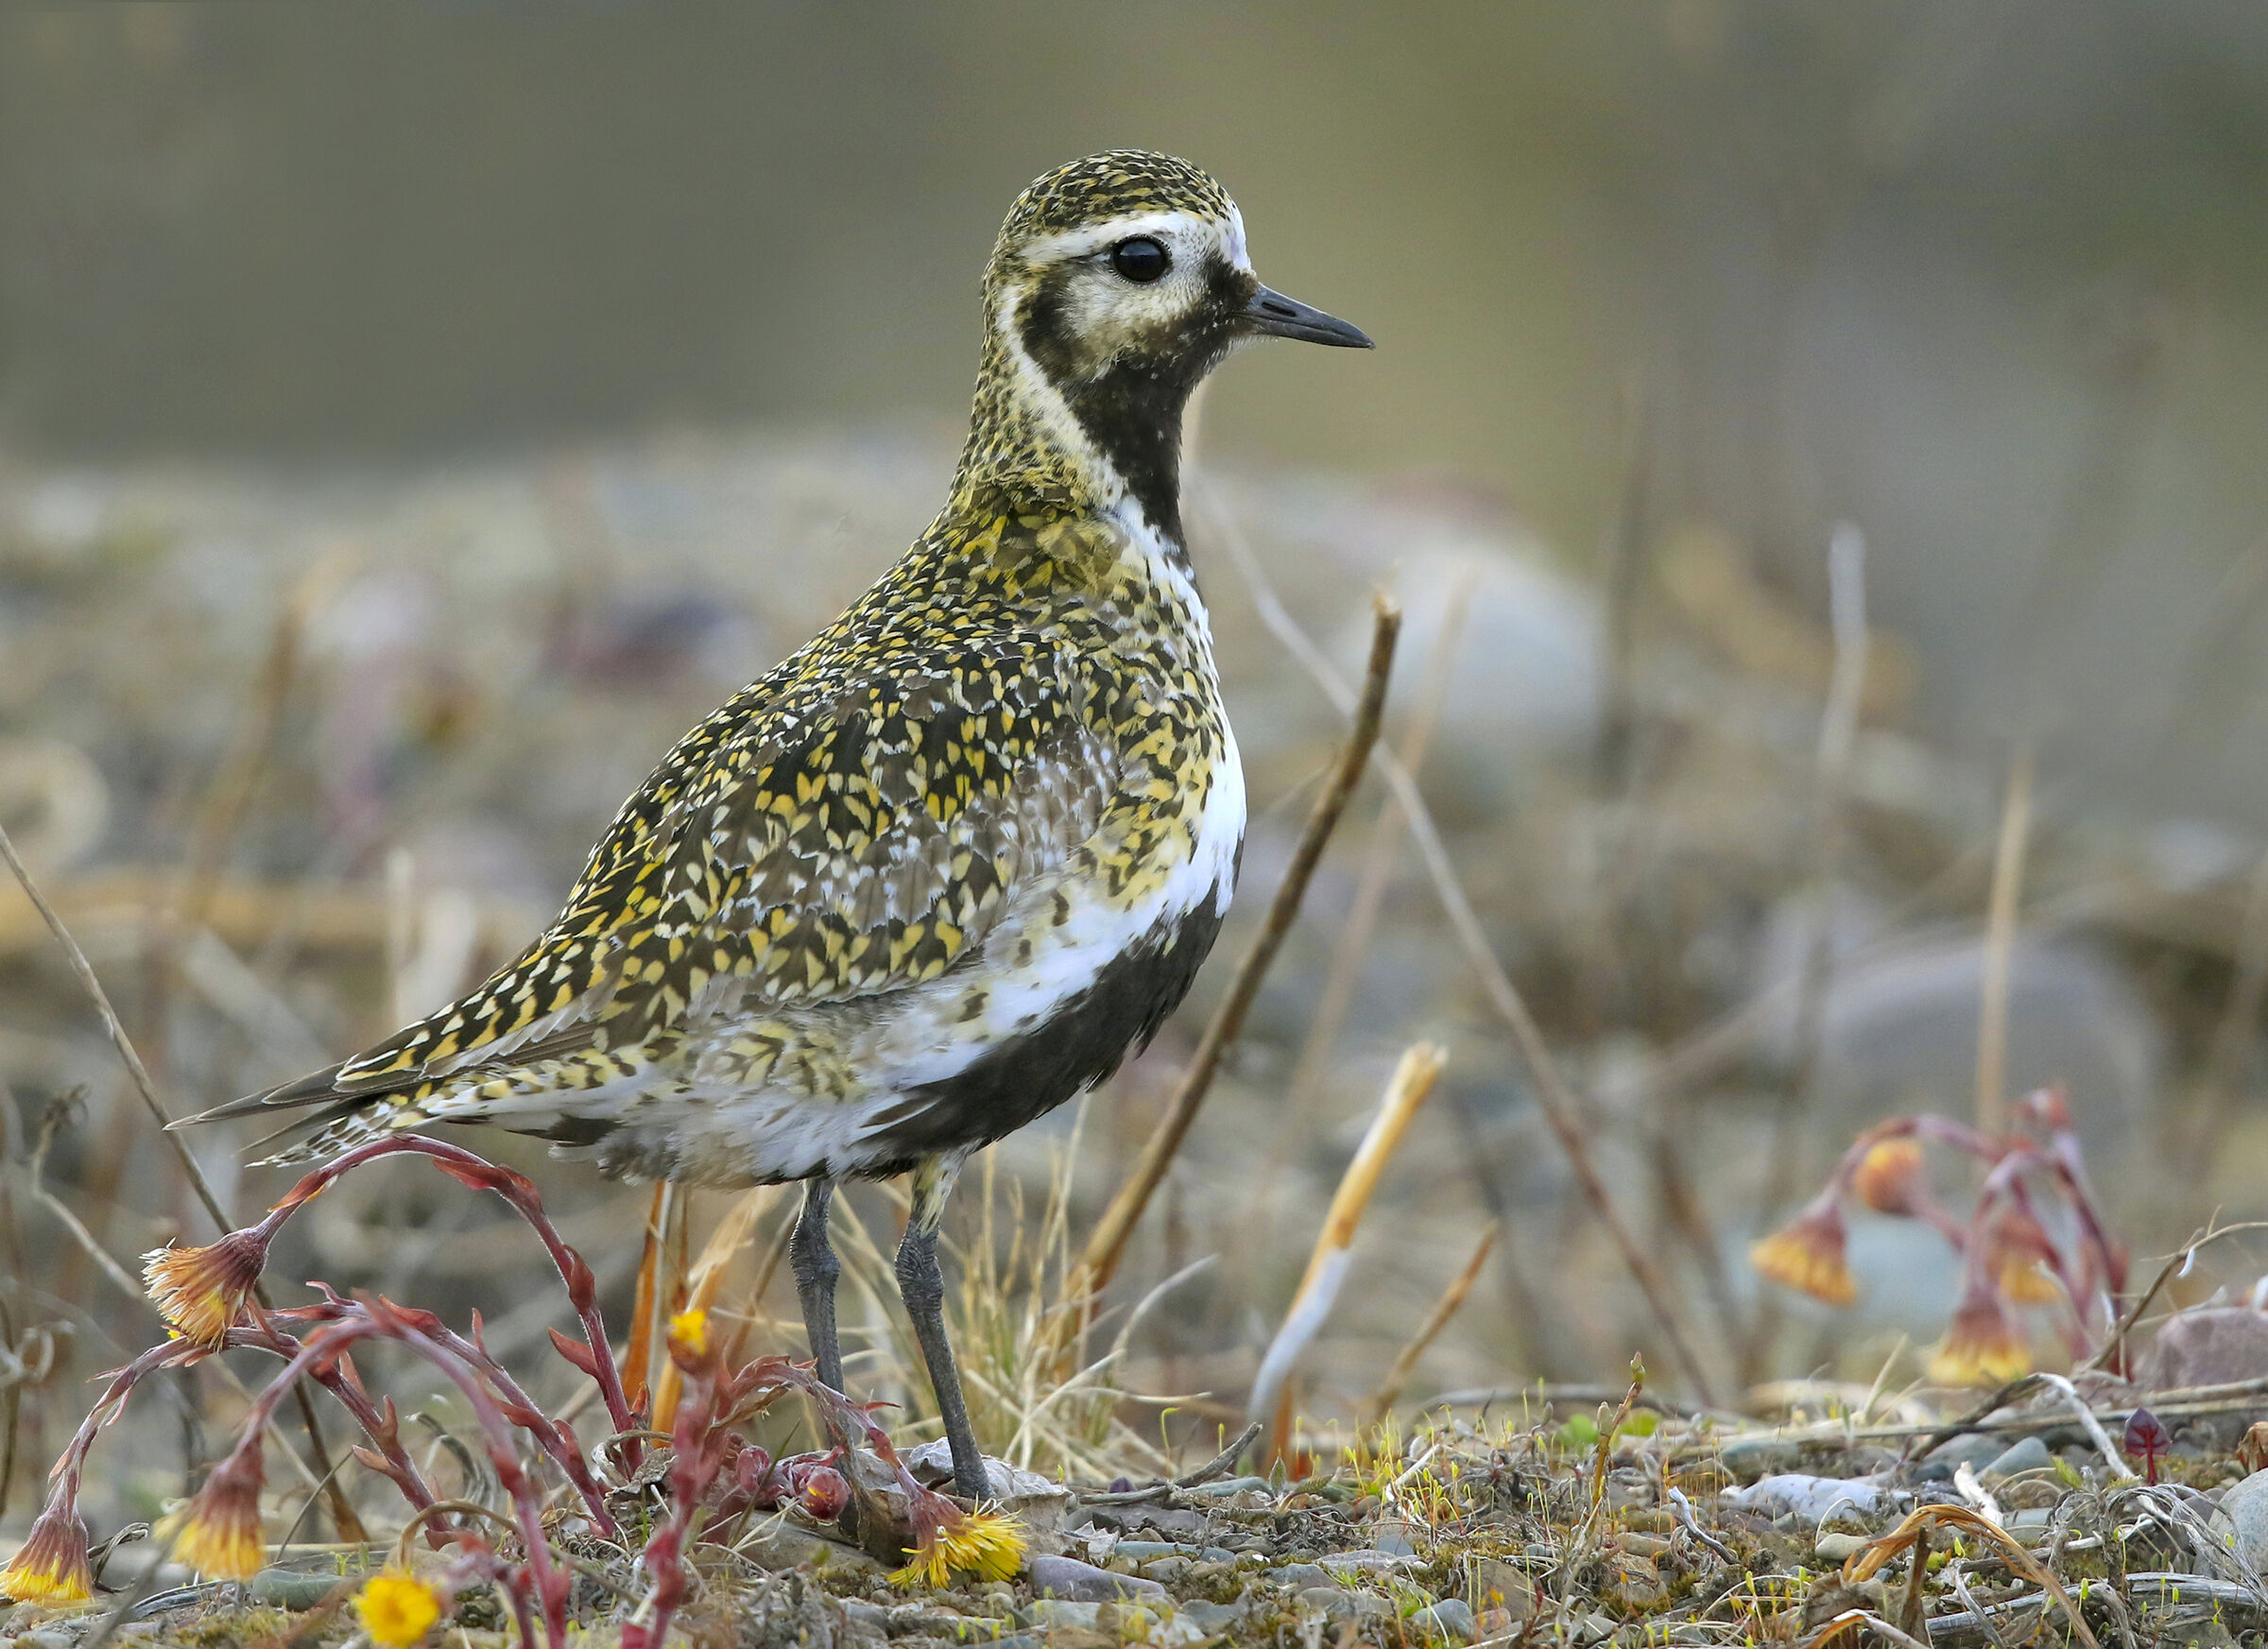 gilded plover in livery...